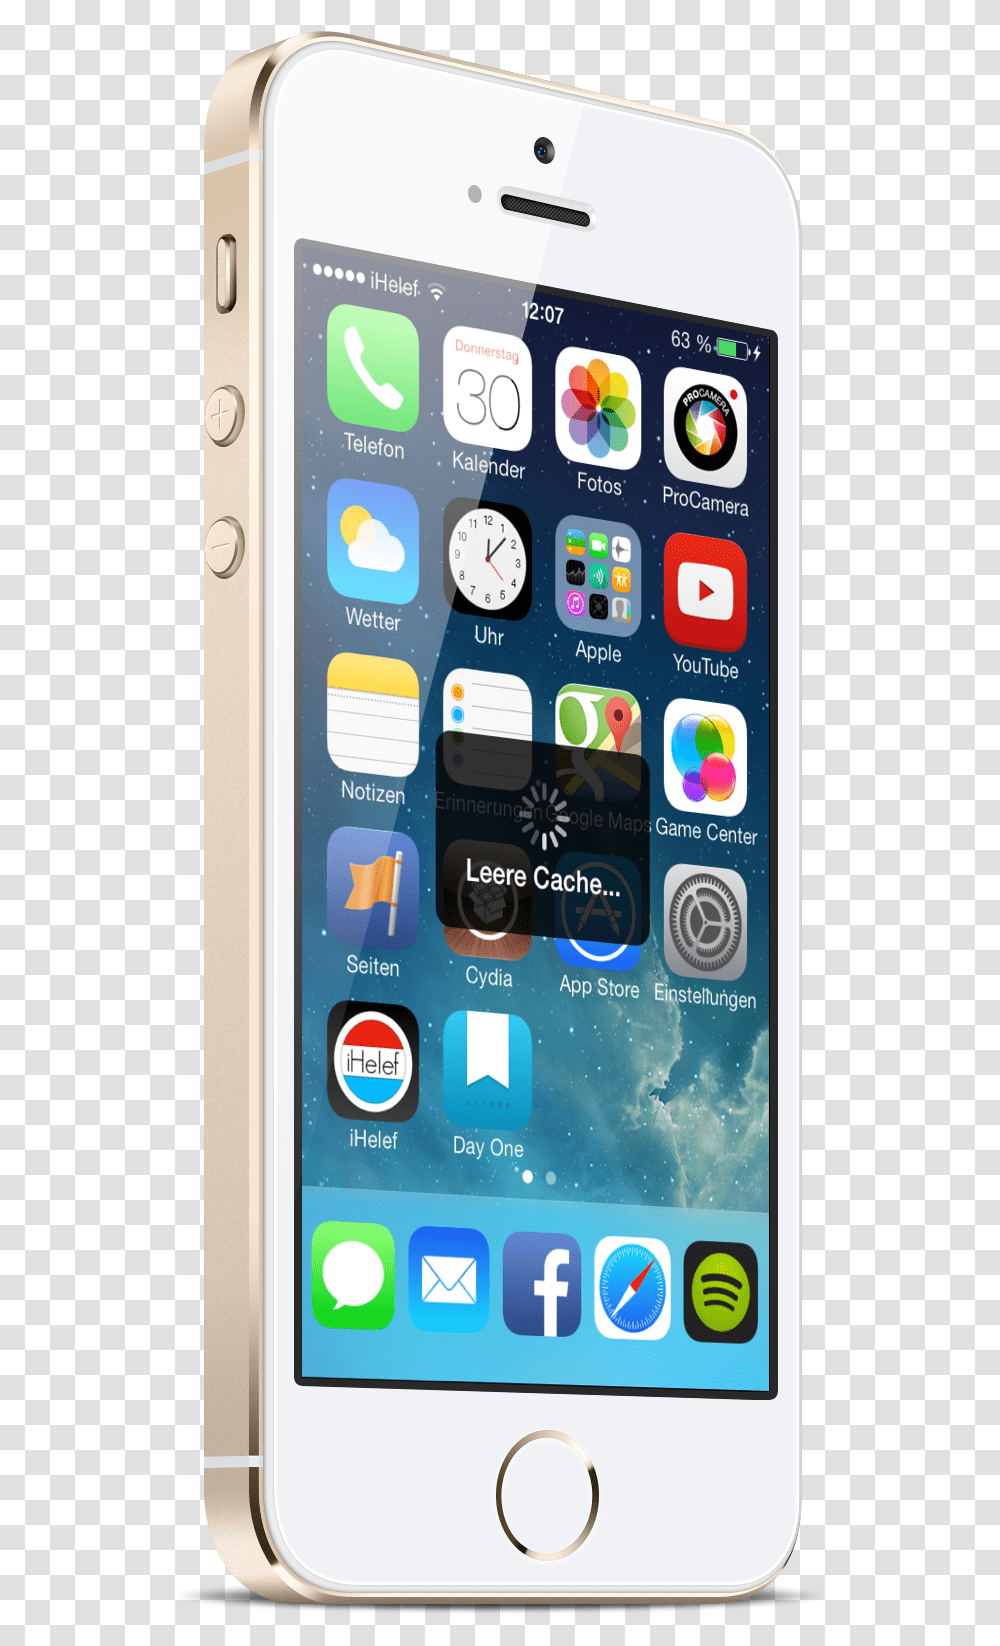 Jailbreak Ihelef Apple Iphone 5s Gold, Mobile Phone, Electronics, Cell Phone, Clock Tower Transparent Png